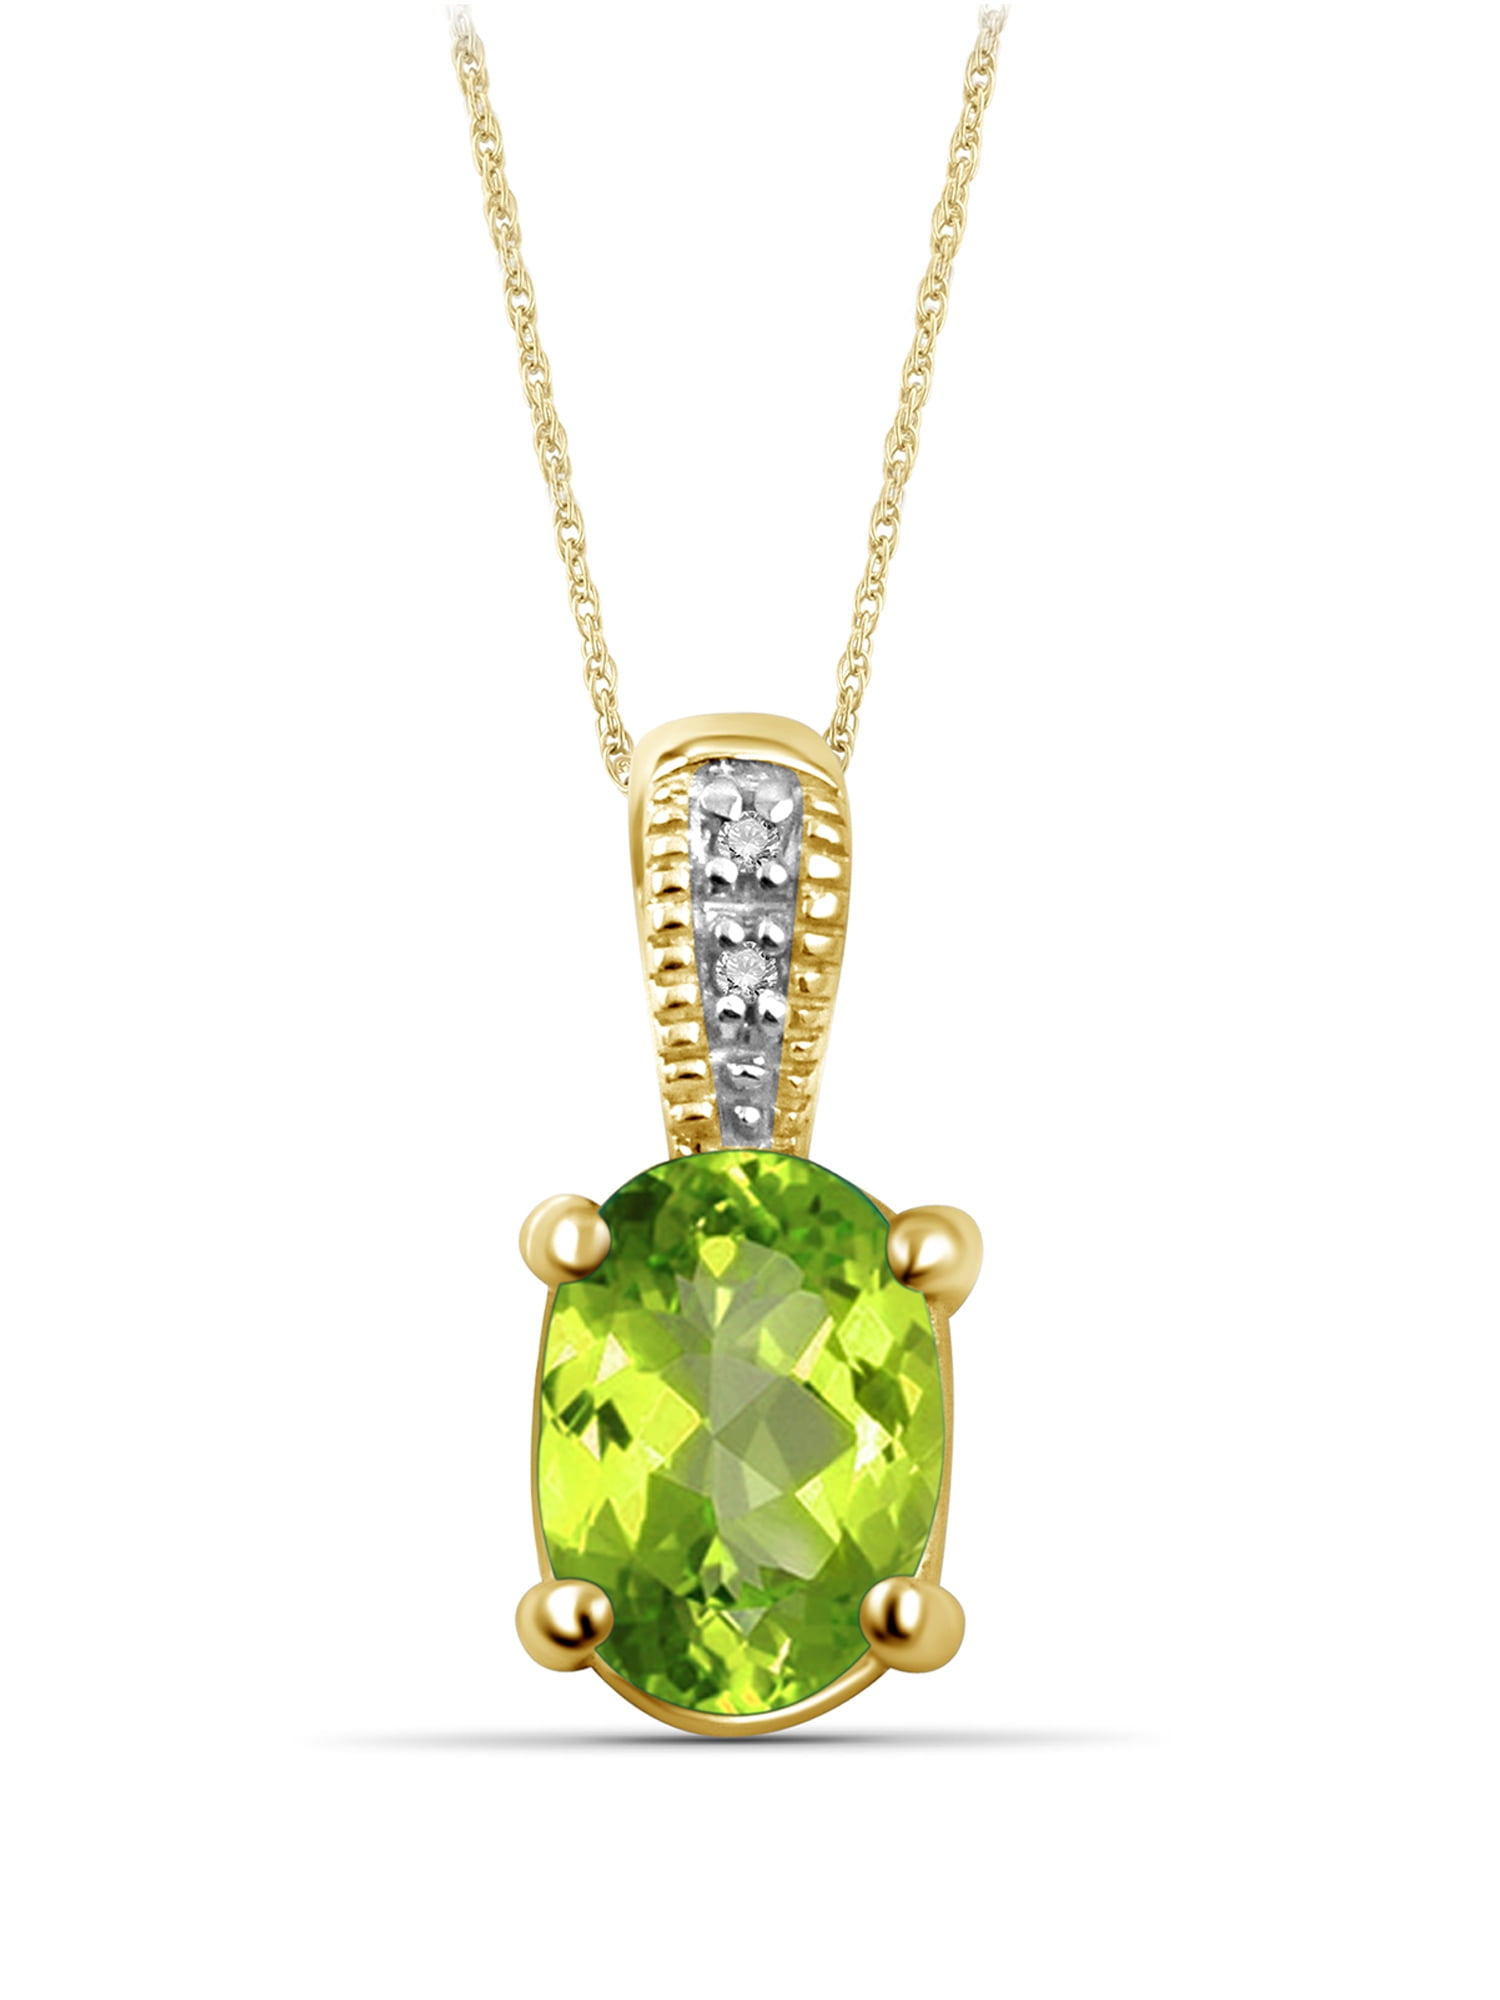 Gem Stone King Round Green Peridot and Simulated Peridot 18K Yellow Gold Plated Silver Pendant 0.32 cttw